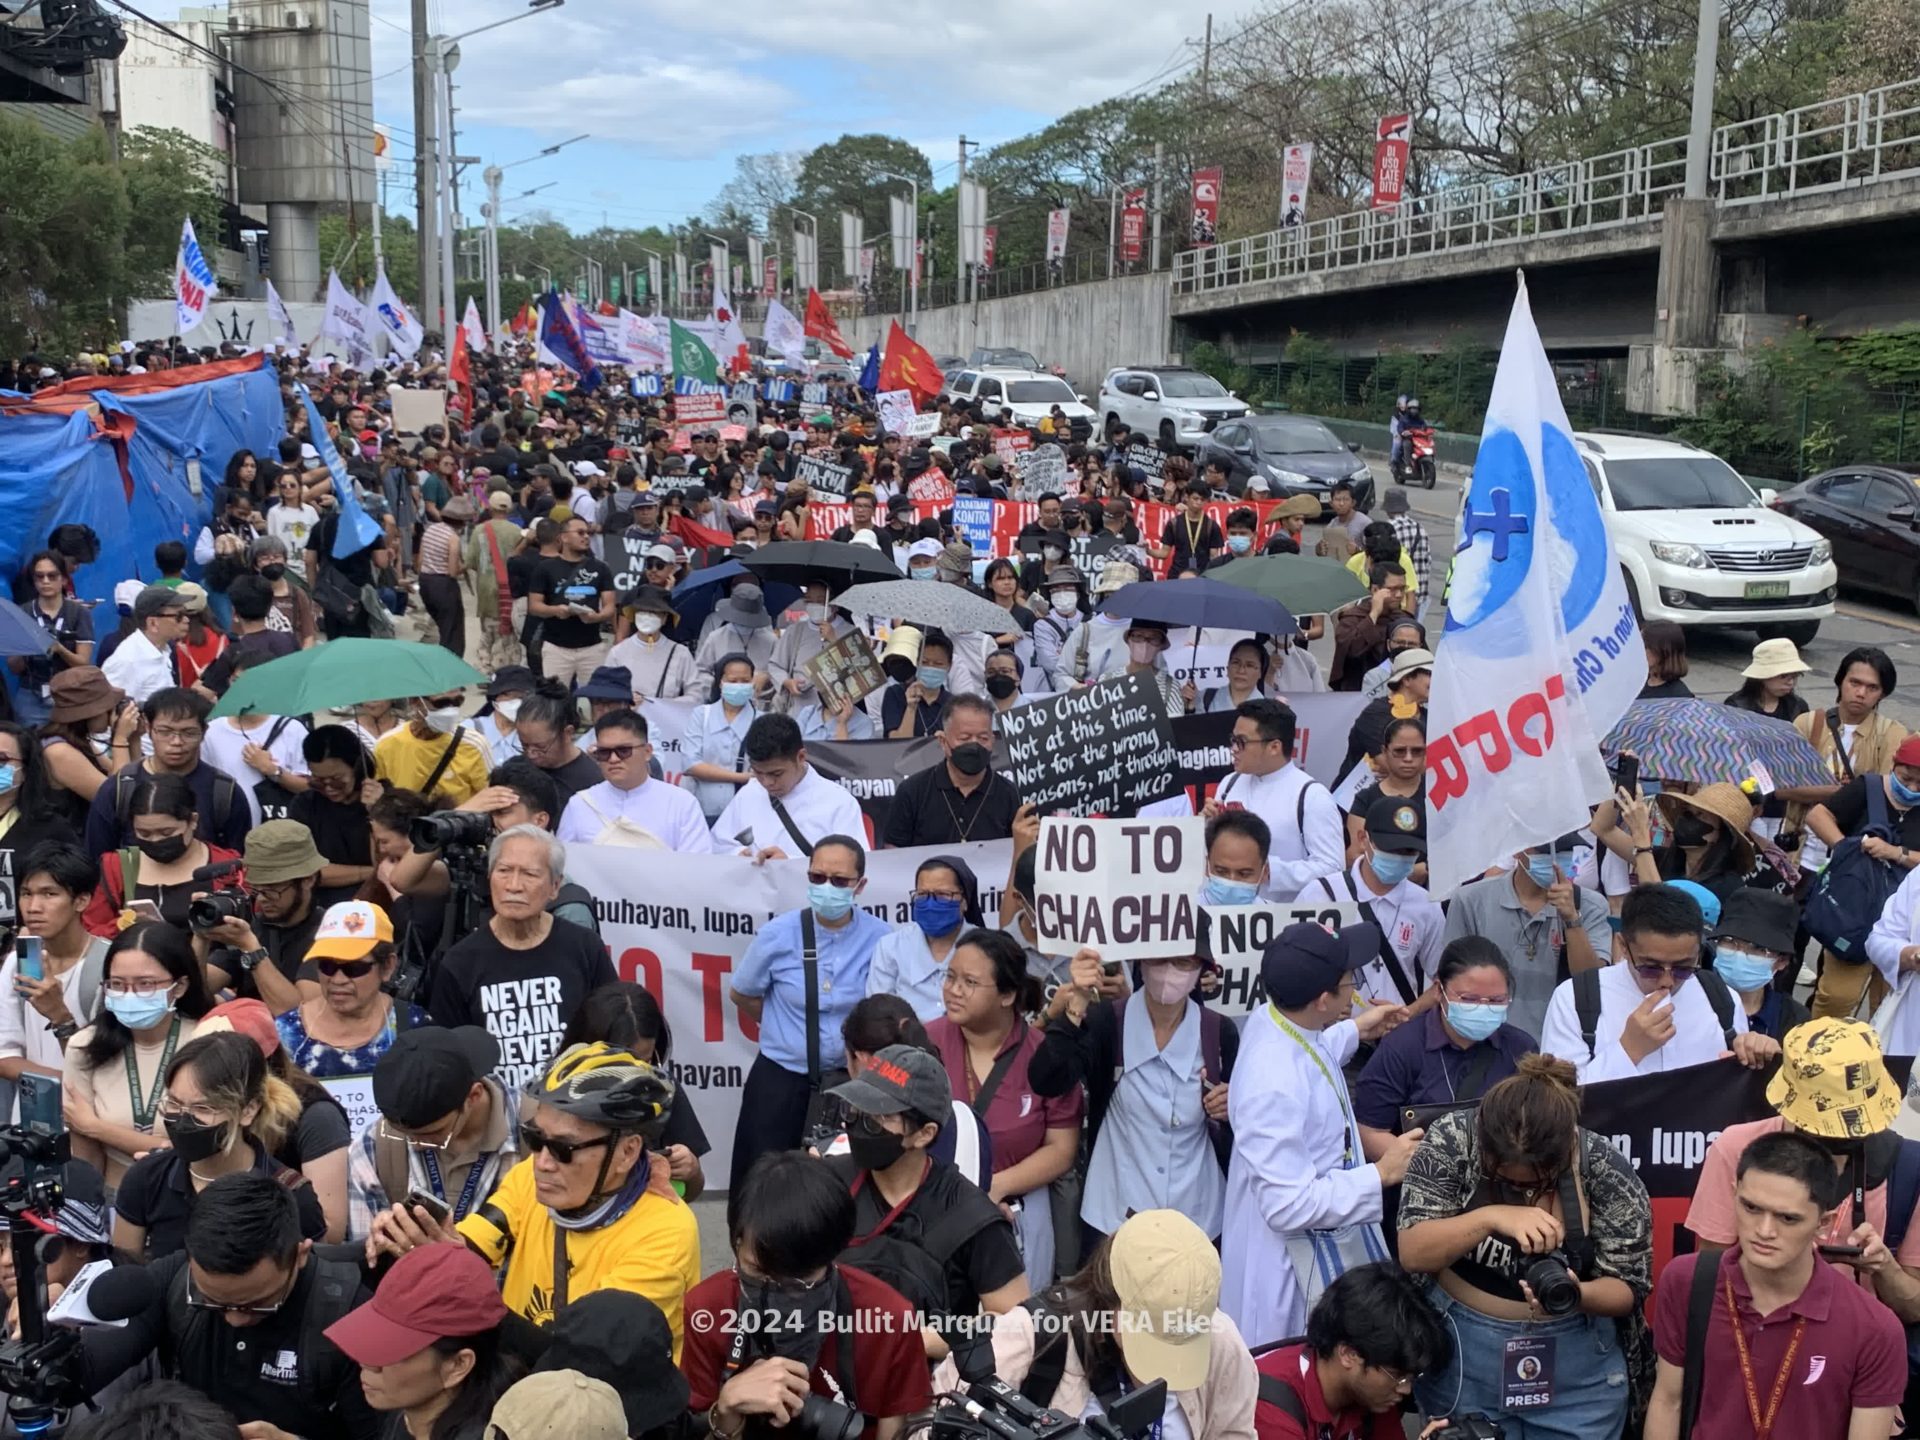 Slogans and placards at the rally showed strong opposition to attempts to change the Constitution that was passed in 1987 following the 1986 restoration of democracy in the country. 4/10 Photo by Bullit Marquez for VERA Files